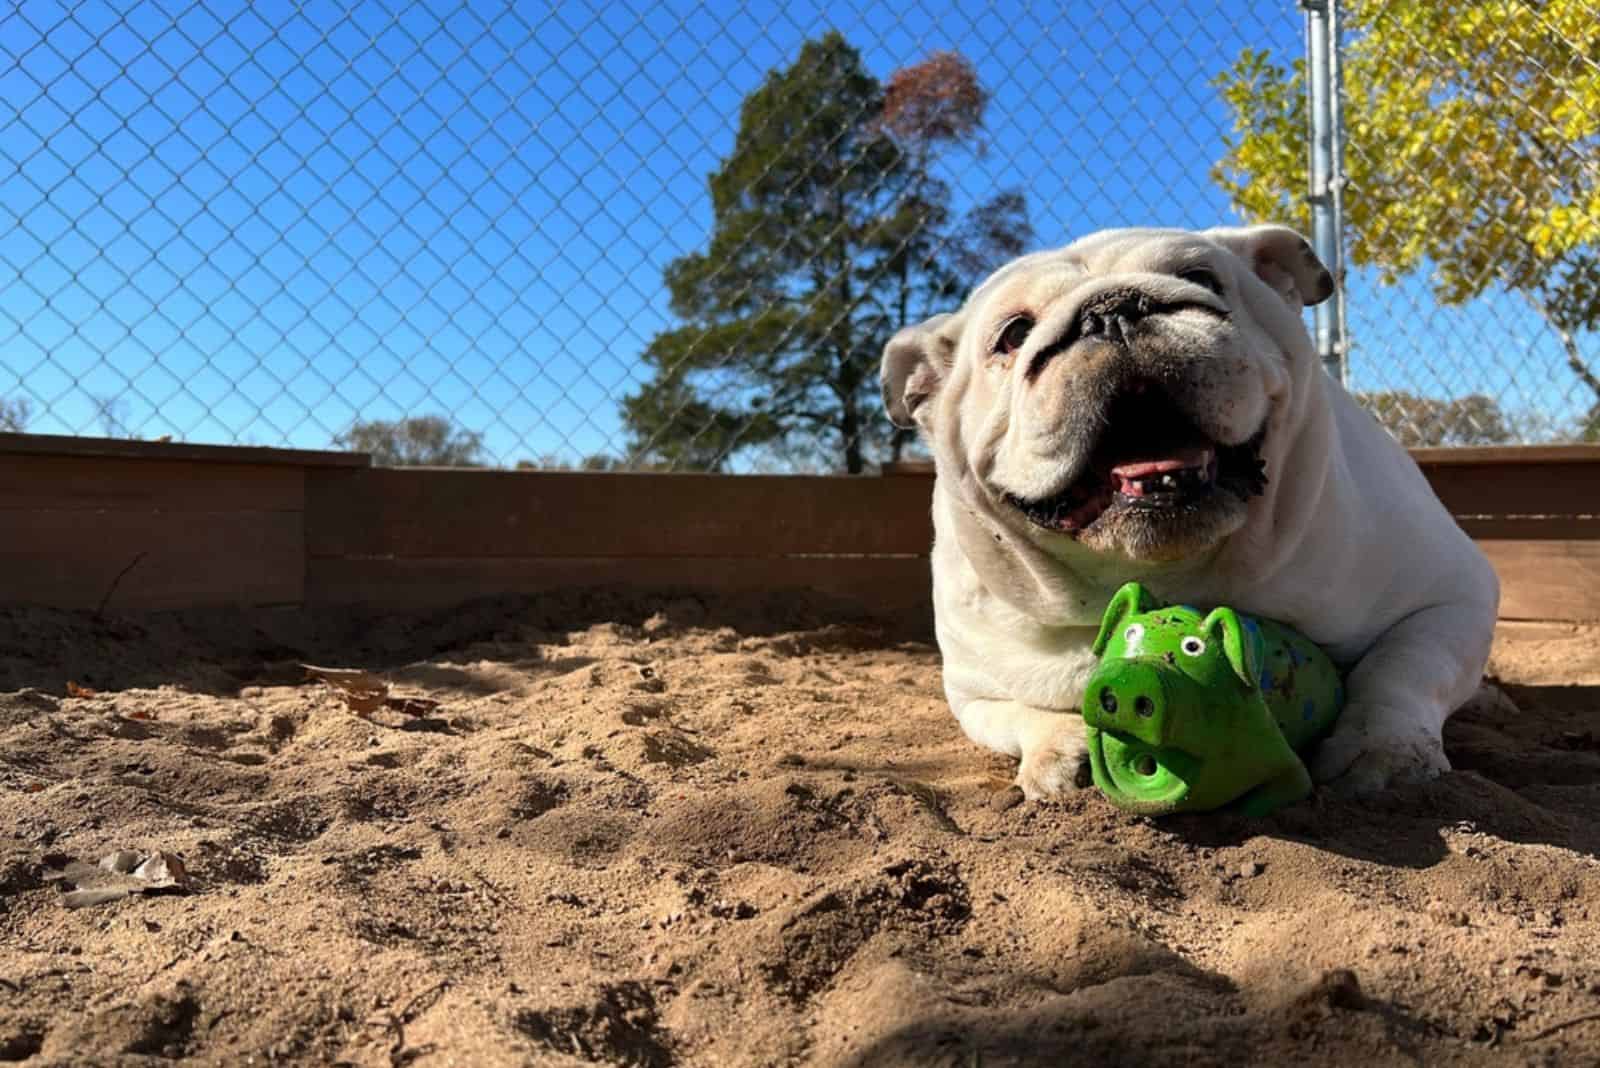  bulldog playing with favorite green squeaky toy pig